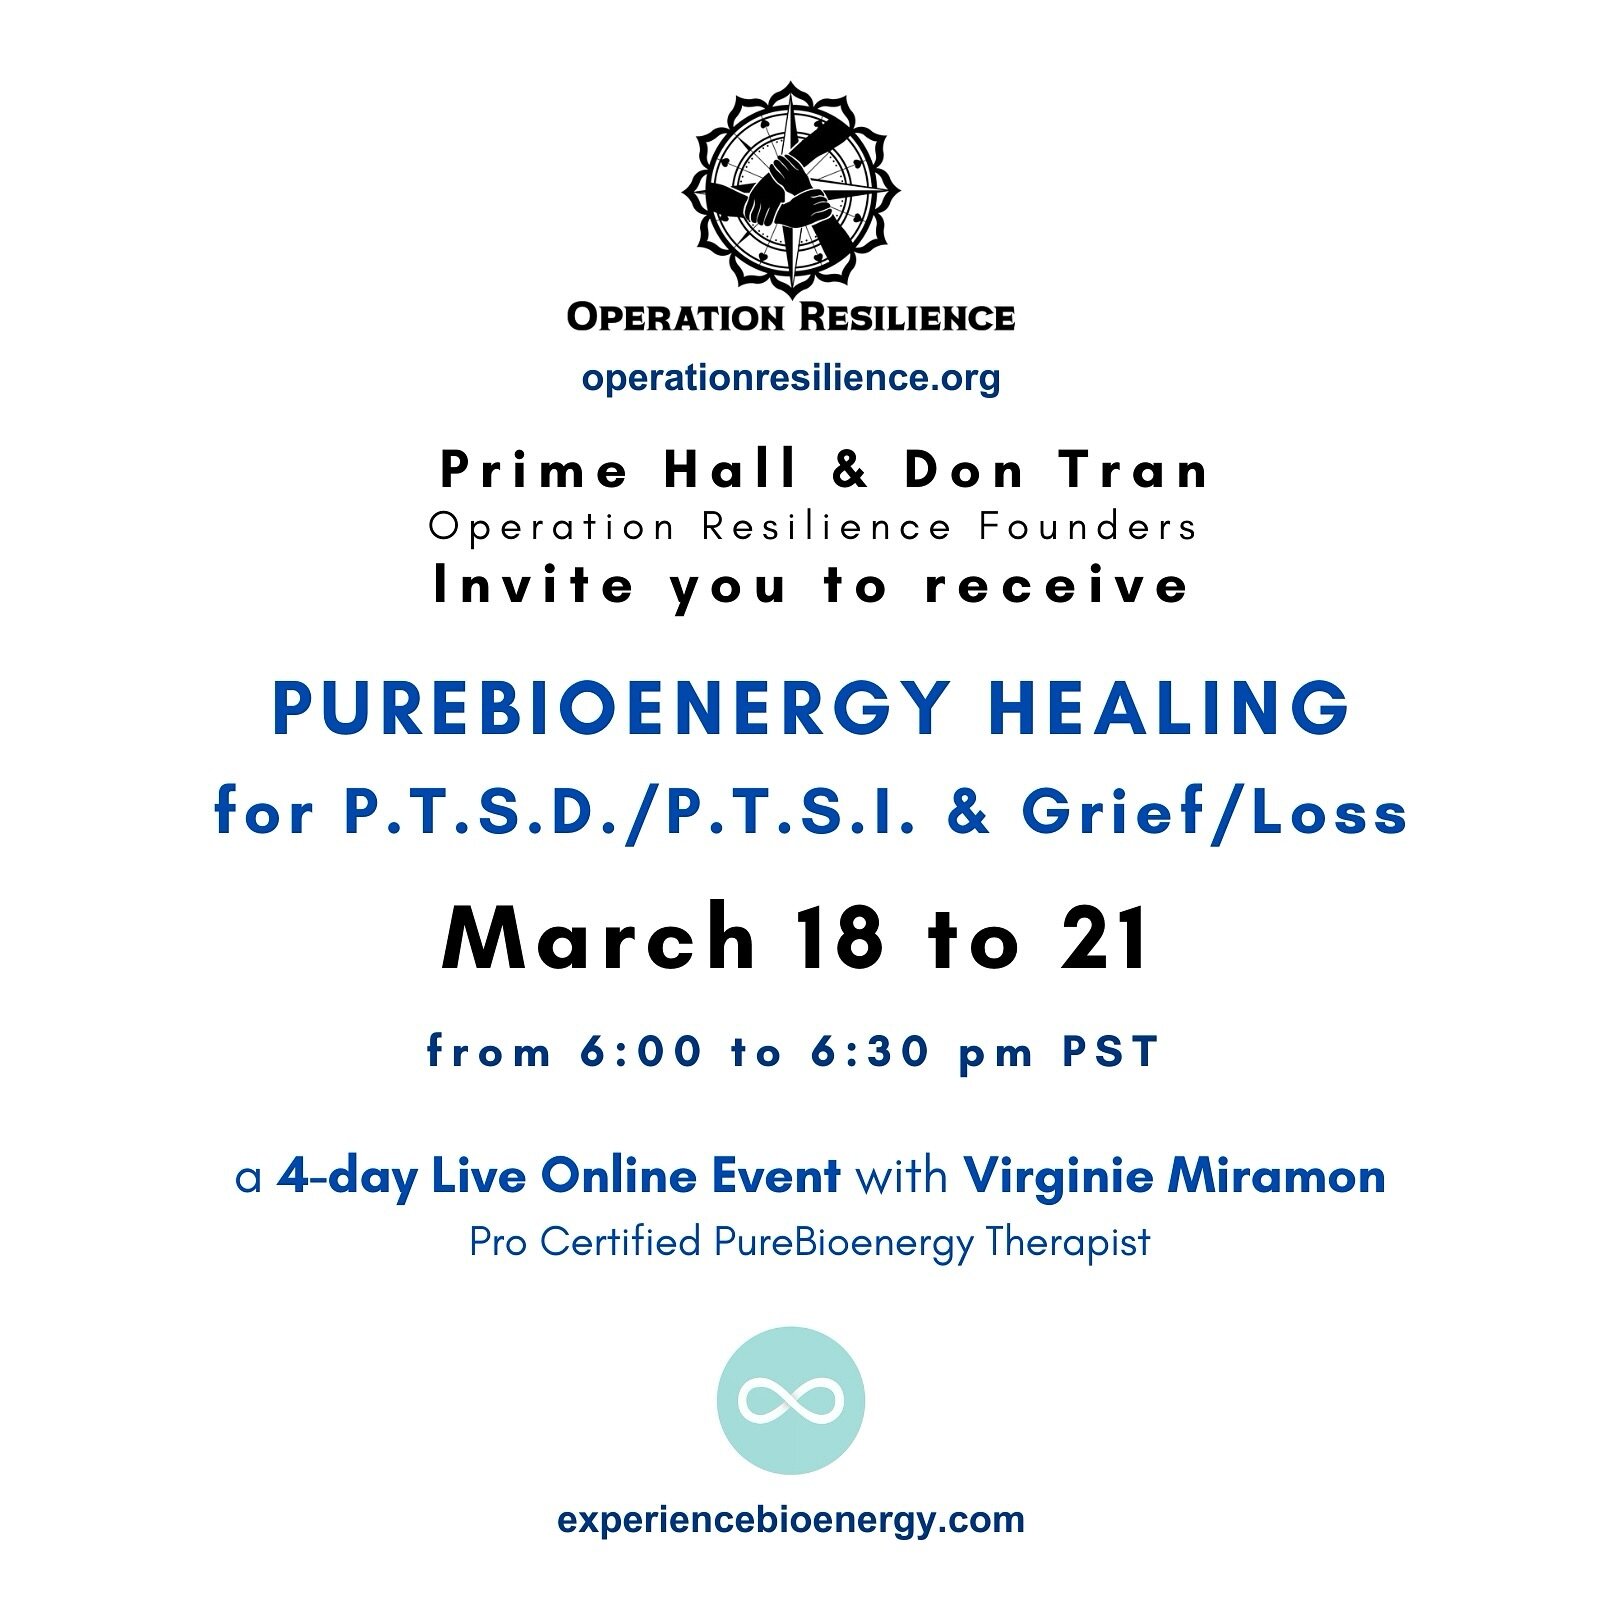 Next week&rsquo;s LIVE online event is opened to all in need of healing. This specific PureBioenergy therapy helps in easing symptoms of PTSD/PTSI, releasing stress &amp; anxiety, calming the mind, opening the heart, bringing balance, processing emot